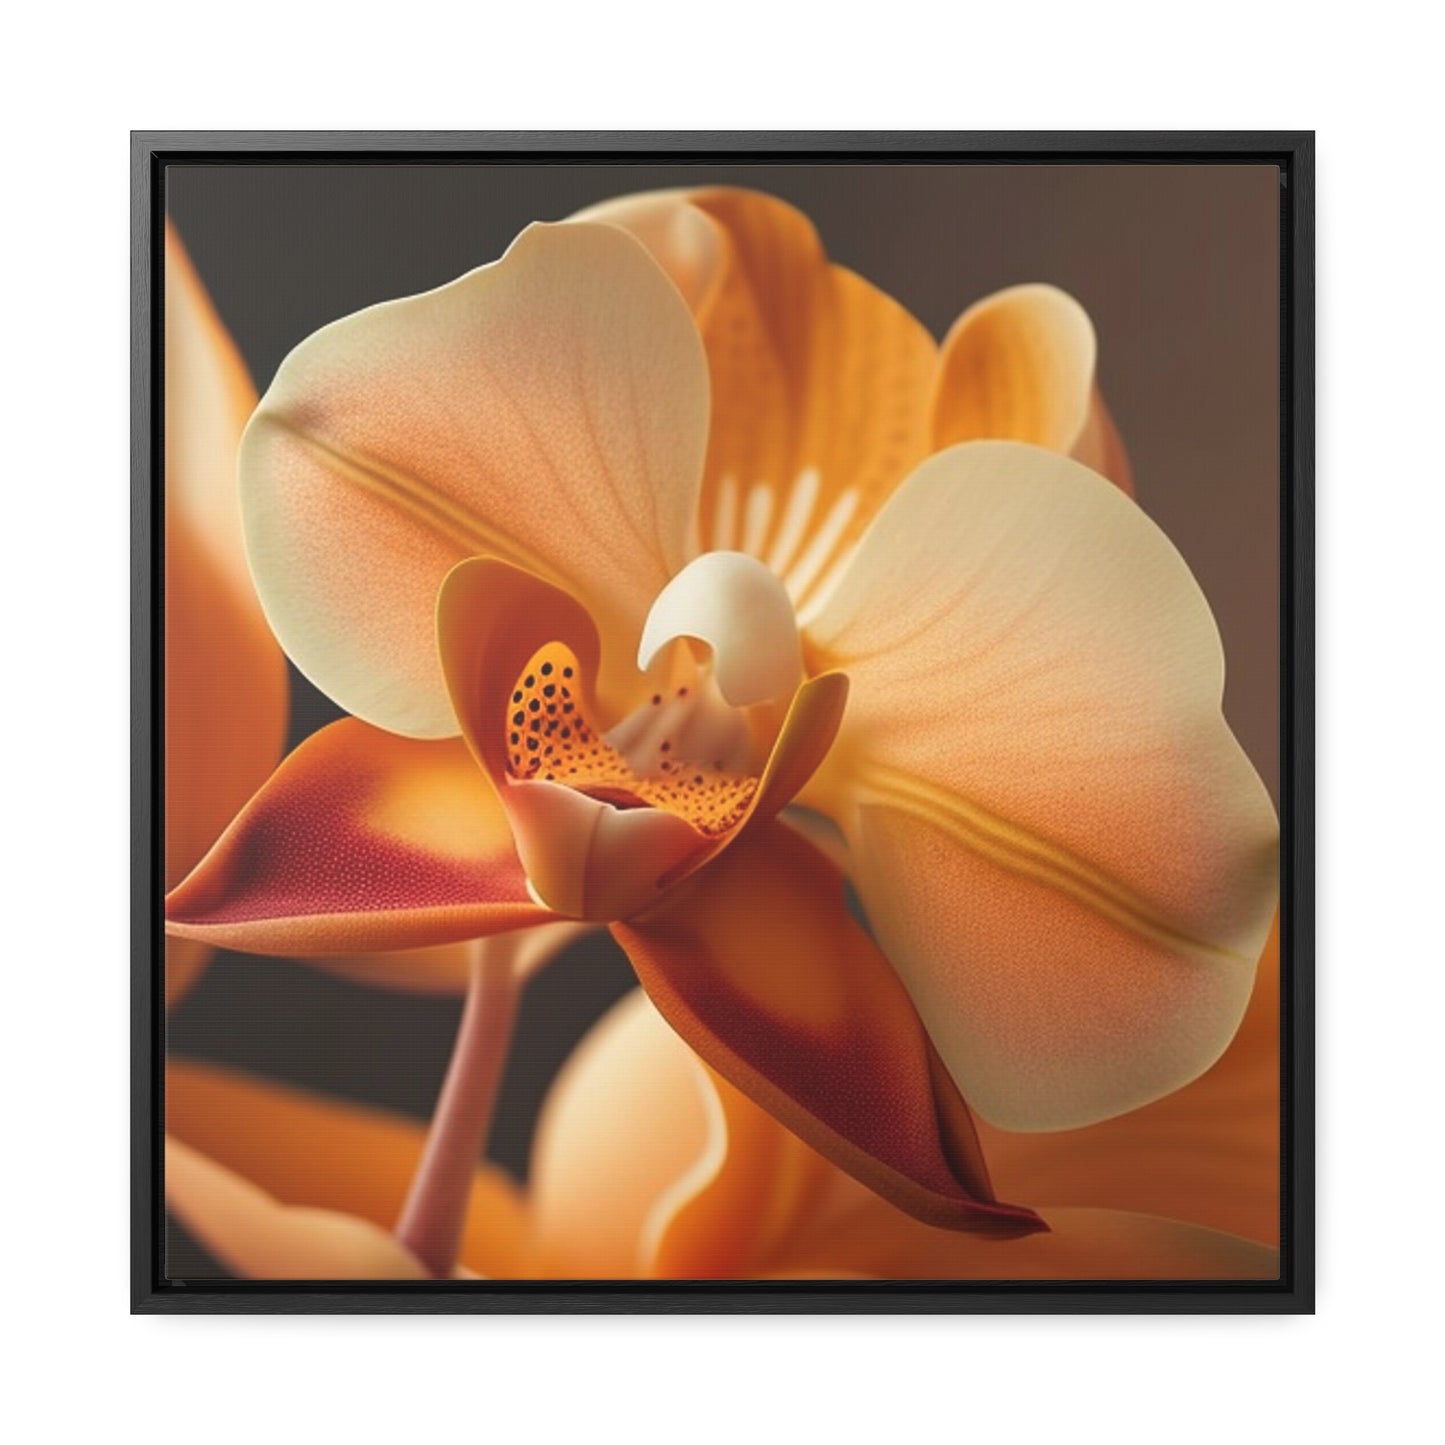 Gallery Canvas Wraps, Square Frame Orange Orchid 3